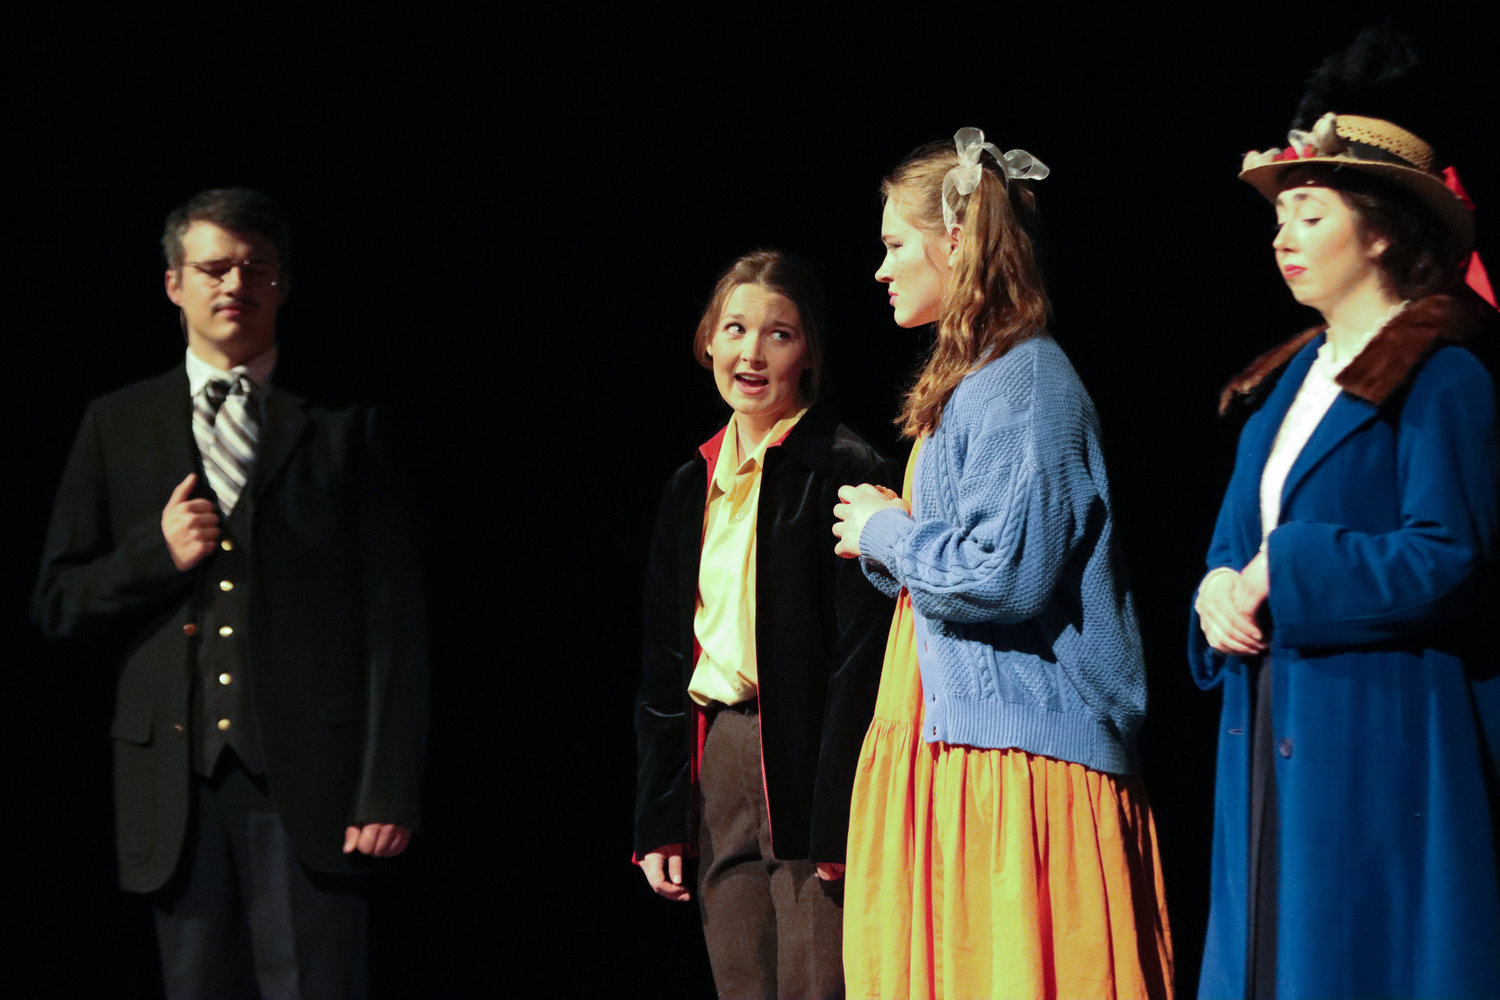 Hillcrest Academy students perform the spring musical, Mary Poppins, in Celebration Hall on Sunday, March 27